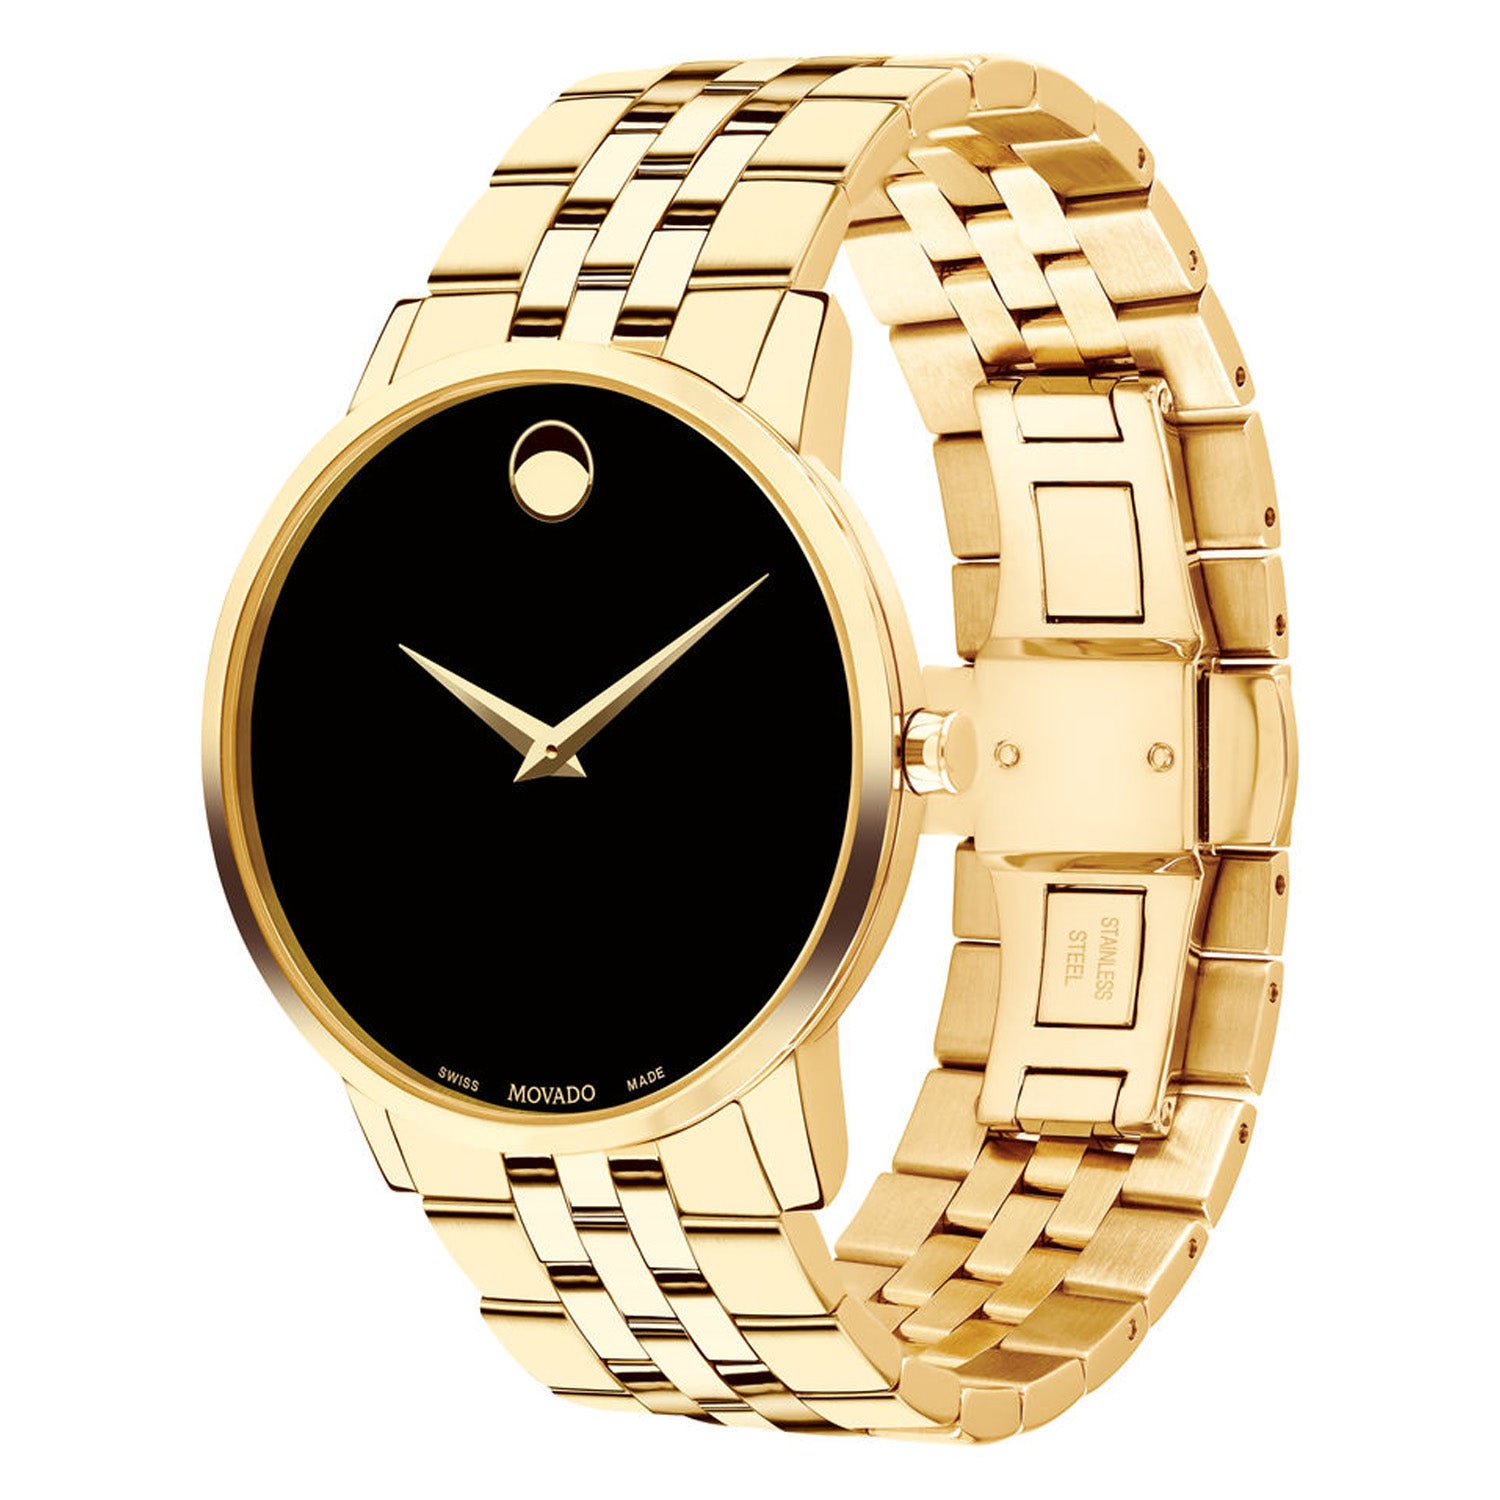 Movado Museum Classic Mens Watch with Black Dial and Yellow Gold Tone Bracelet (Swiss quartz movement)